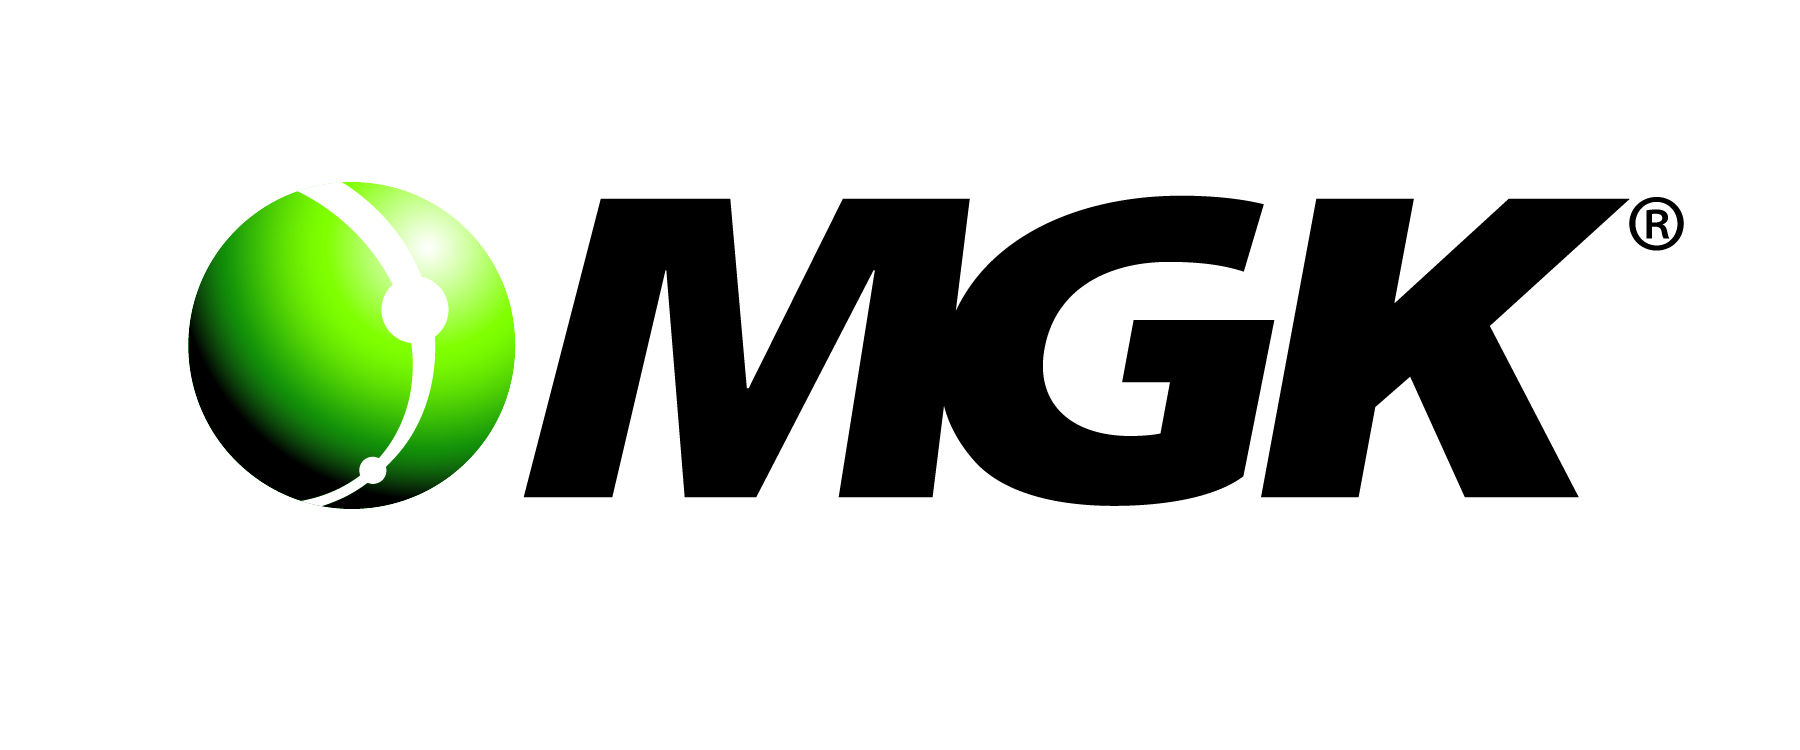 MGK Acquired DeBug Brands from Agro Logistic Systems, Inc.